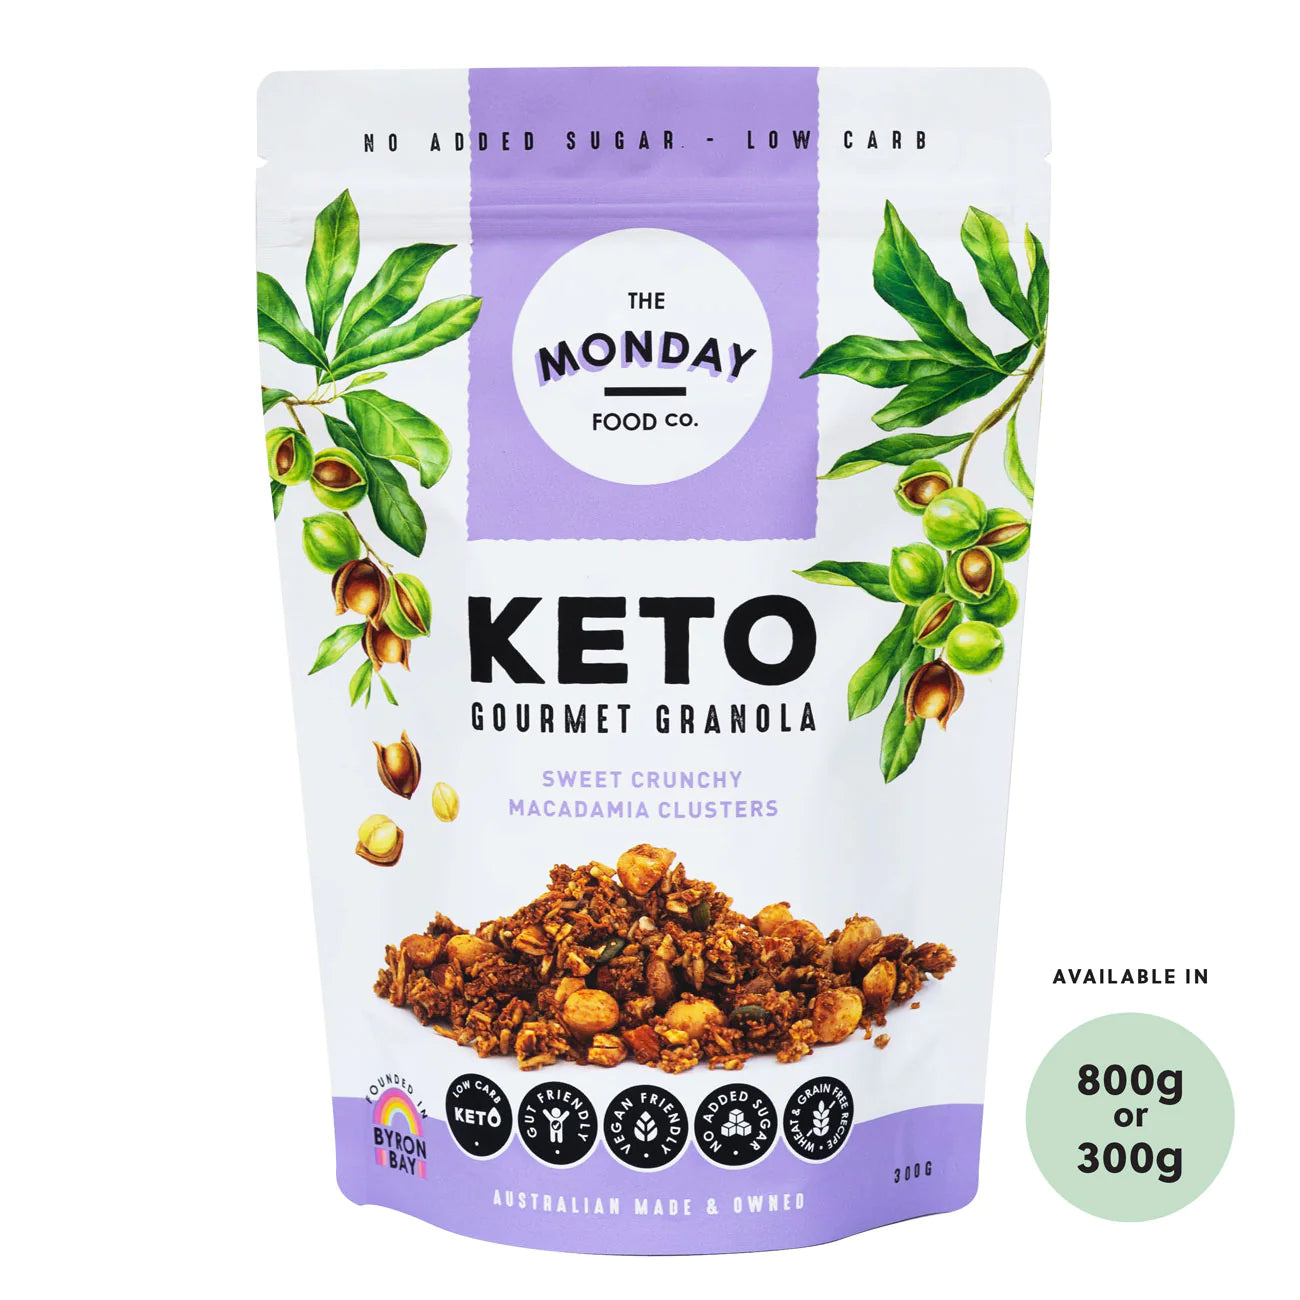 THE MONDAY FOOD CO. Keto Gourmet Granola Sweet Crunchy Macadamia Clusters 300g